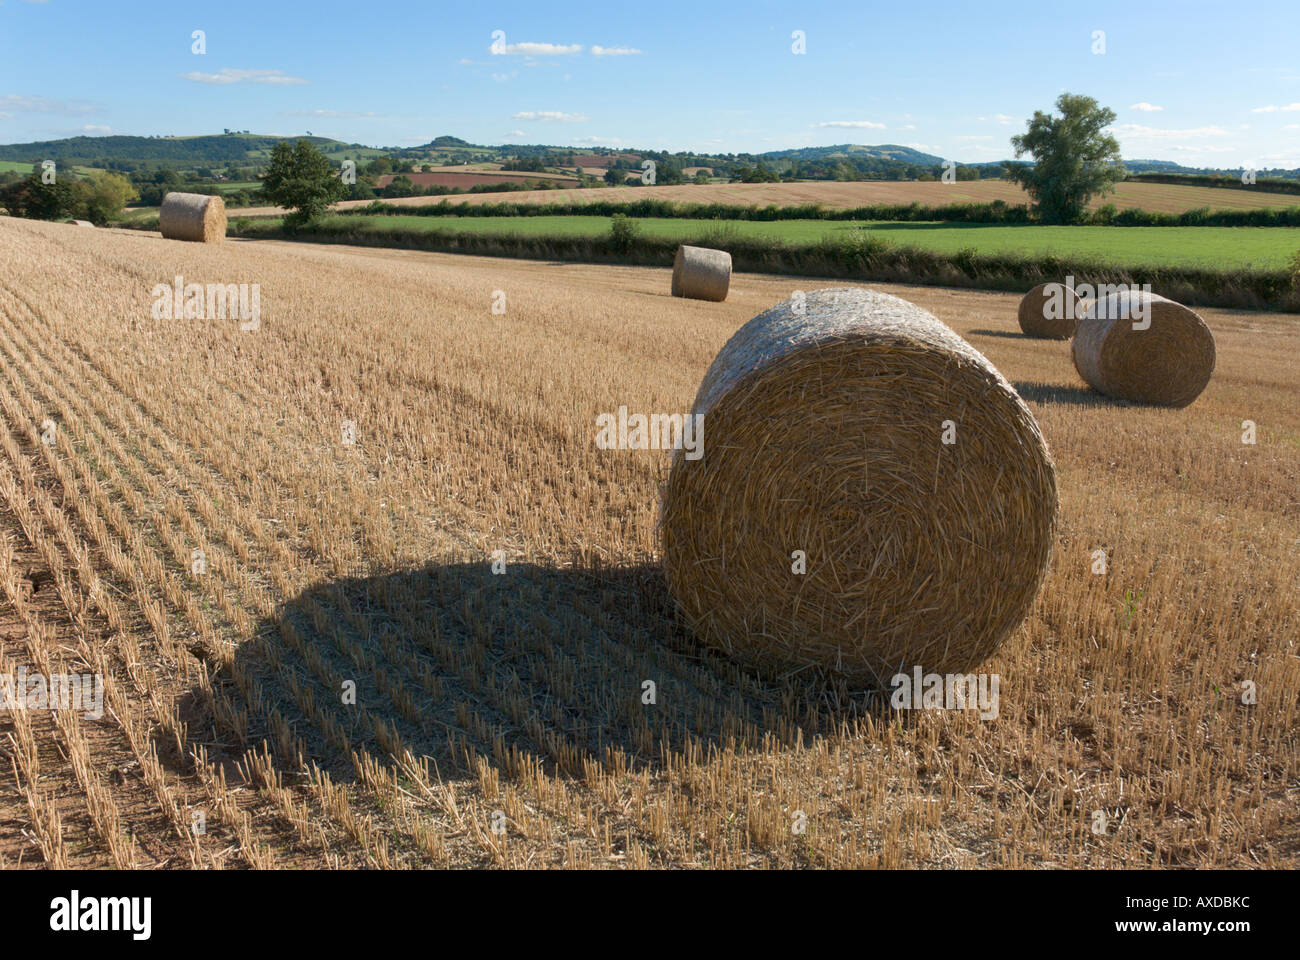 Bales of hay in corn field Stock Photo